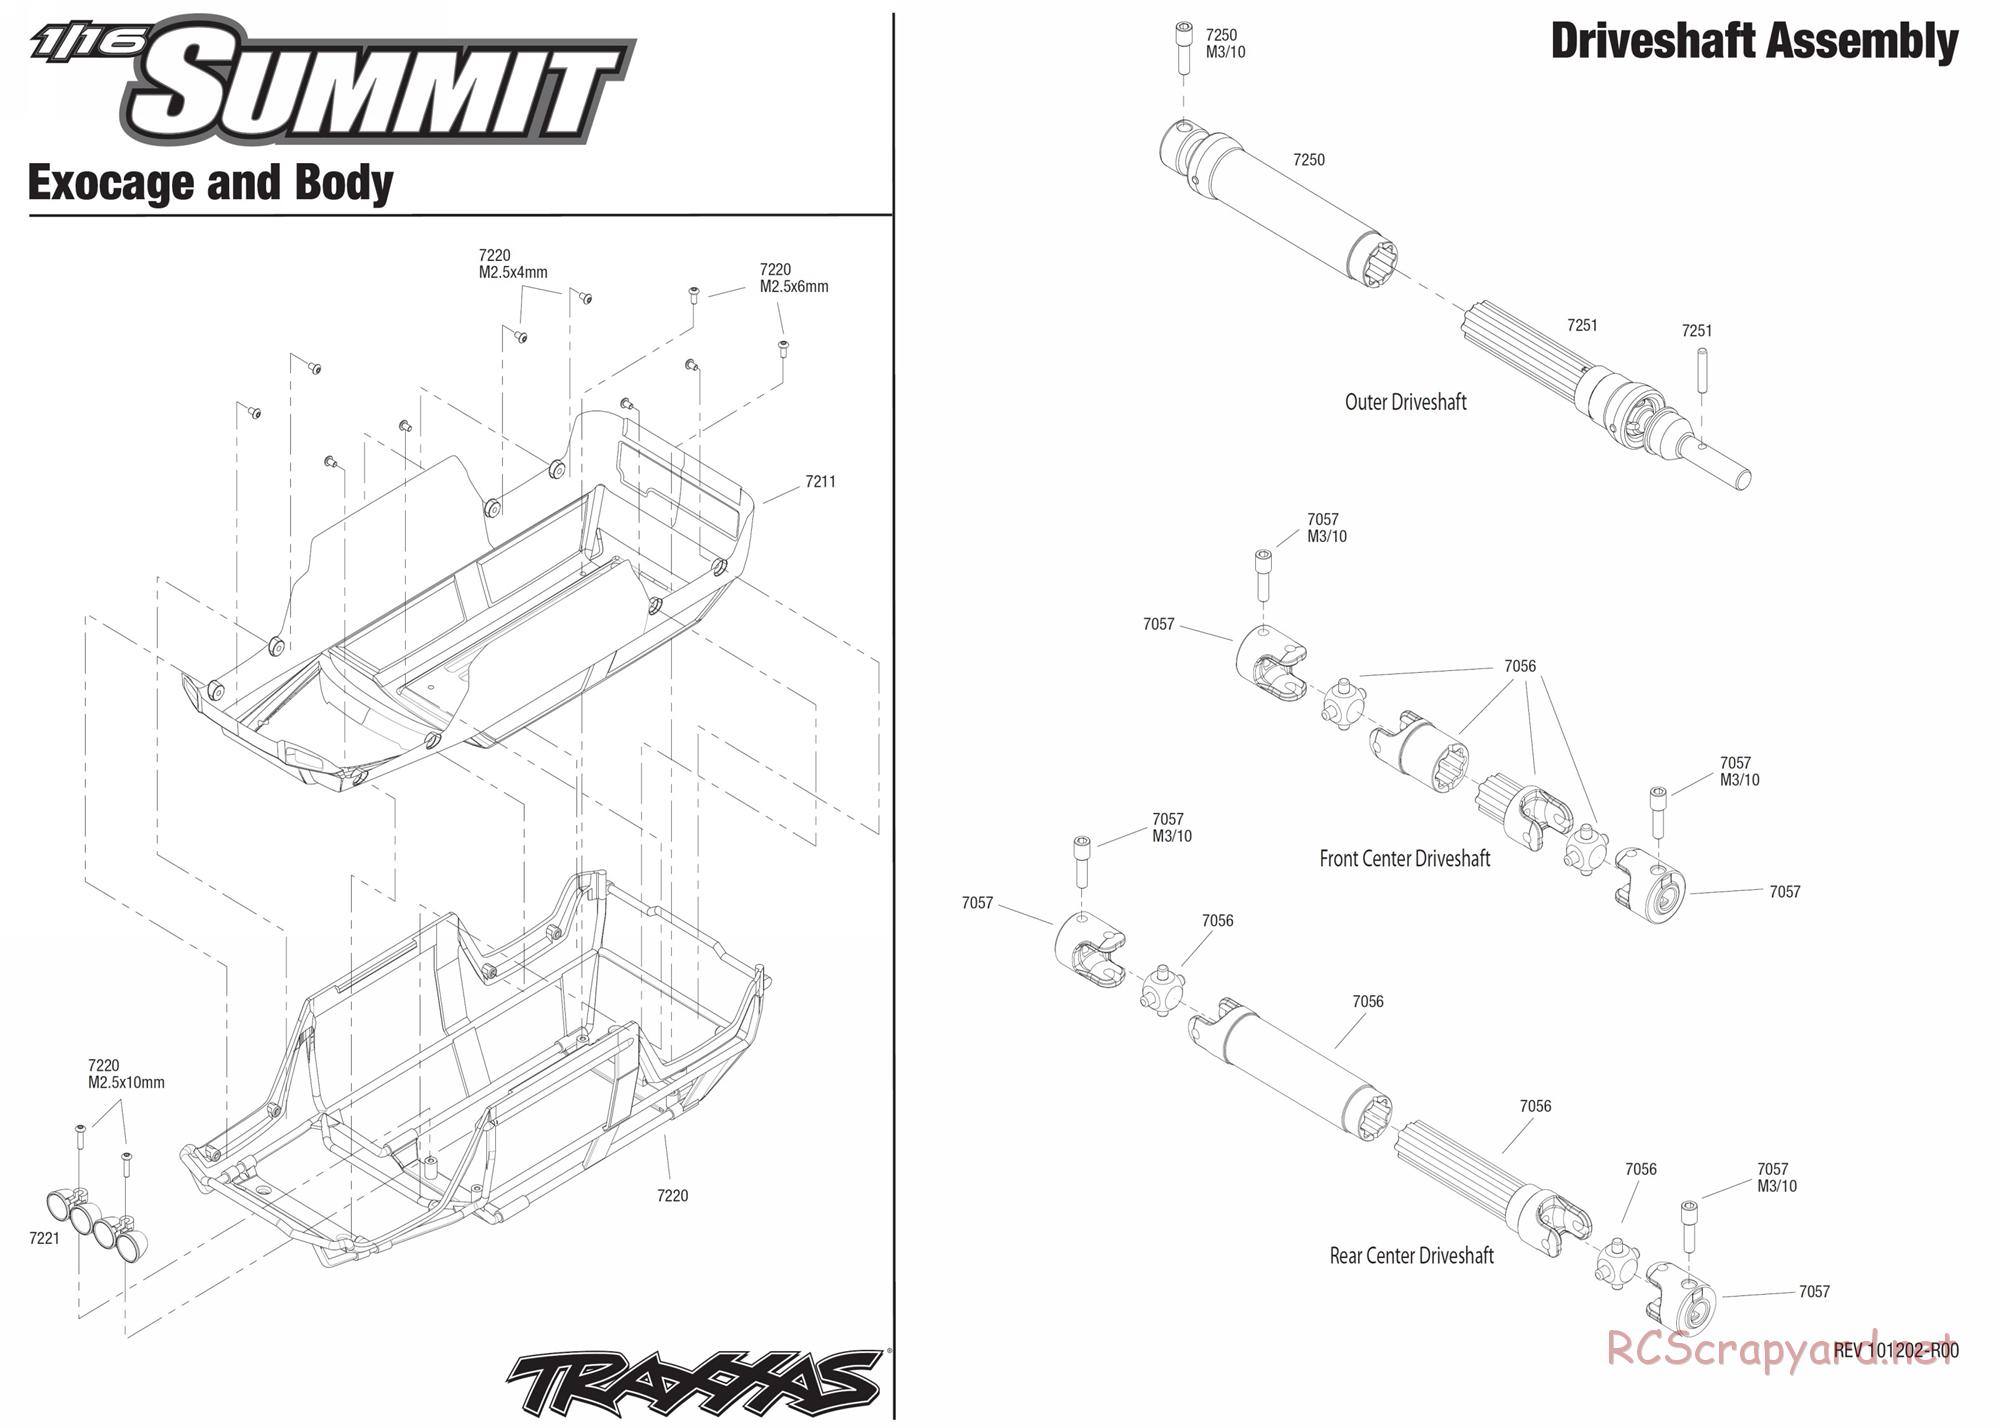 Traxxas - 1/16 Summit (2011) - Exploded Views - Page 2